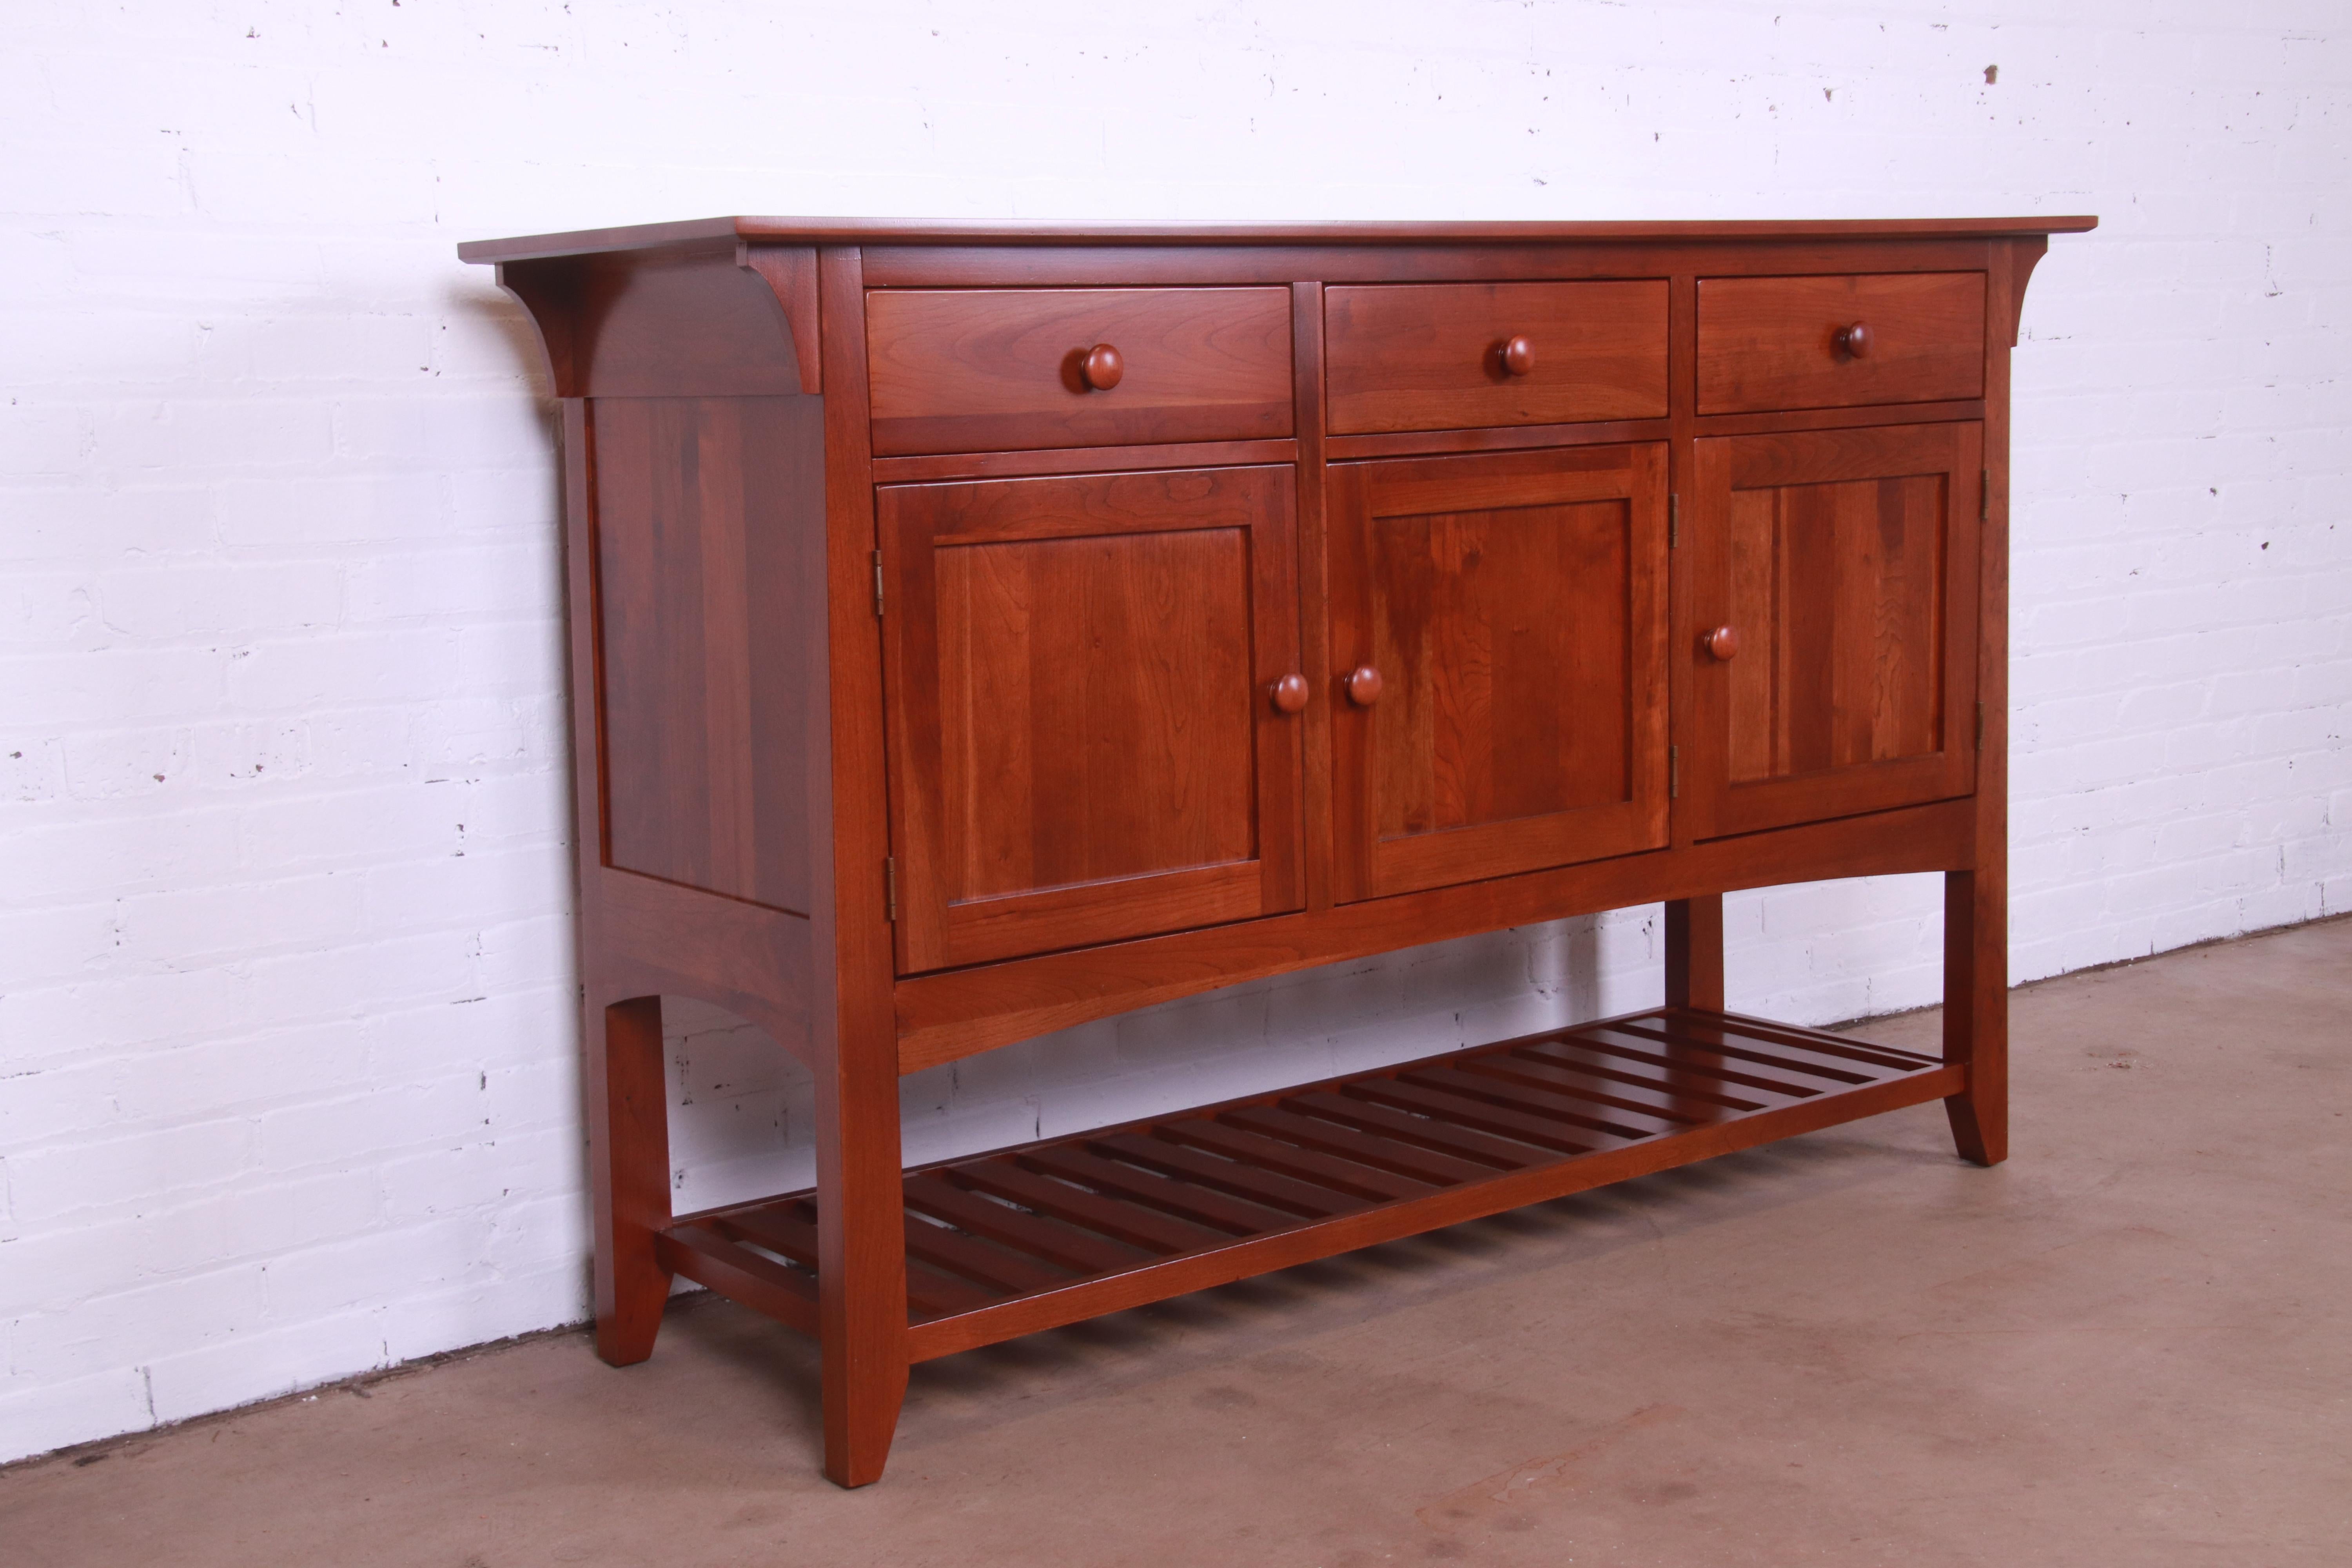 American Ethan Allen Arts & Crafts Cherry Wood Sideboard or Bar Cabinet, Newly Refinished